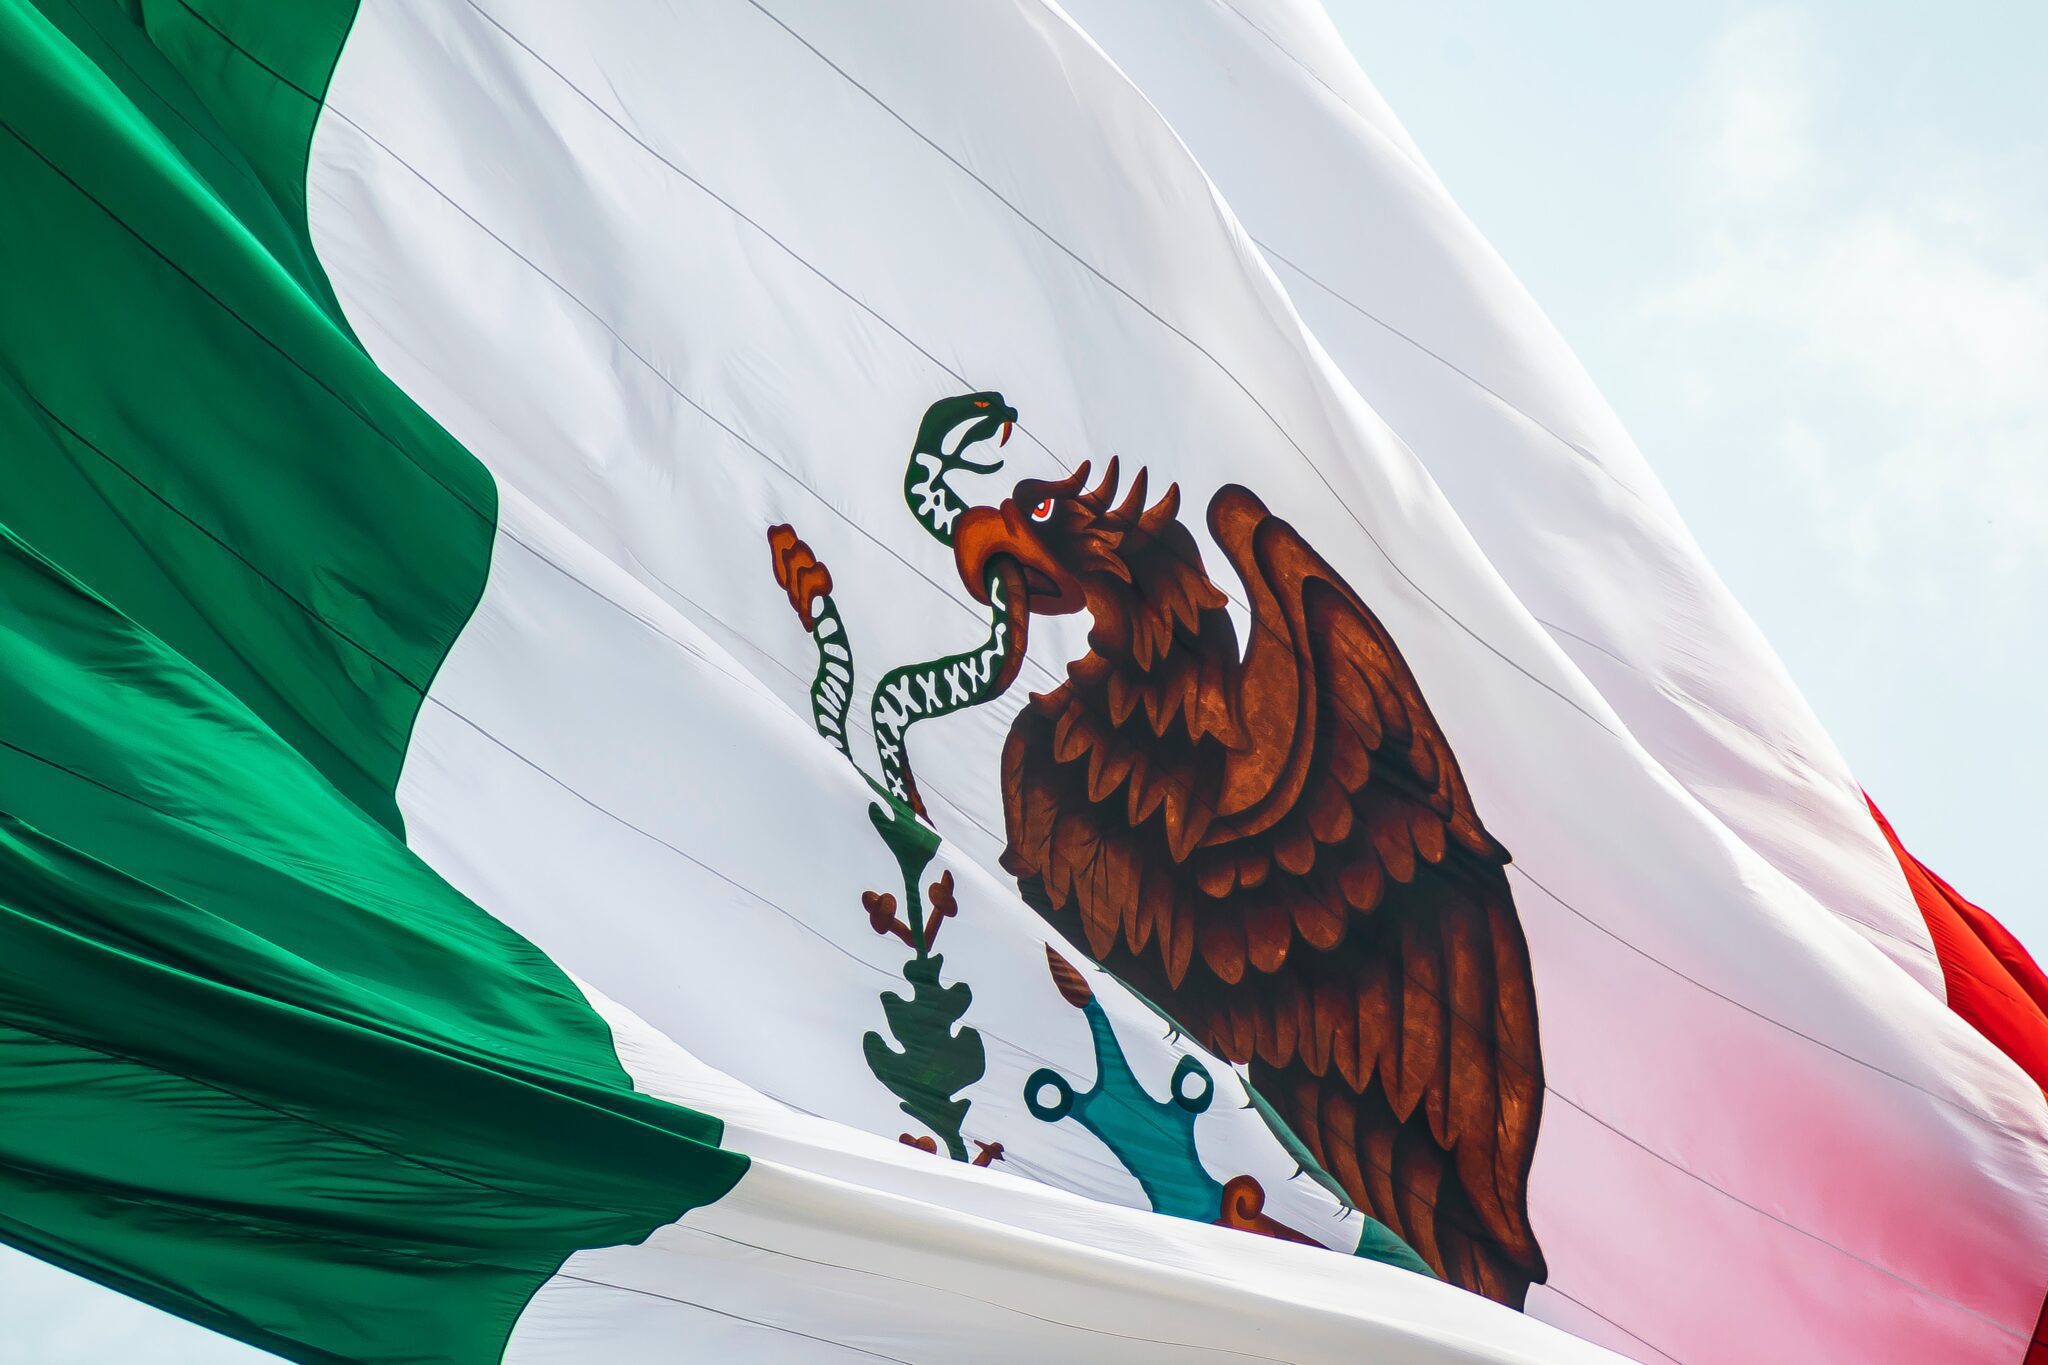 Stock image of Mexican flag to accompany article on financial regulatory compliance in Mexico